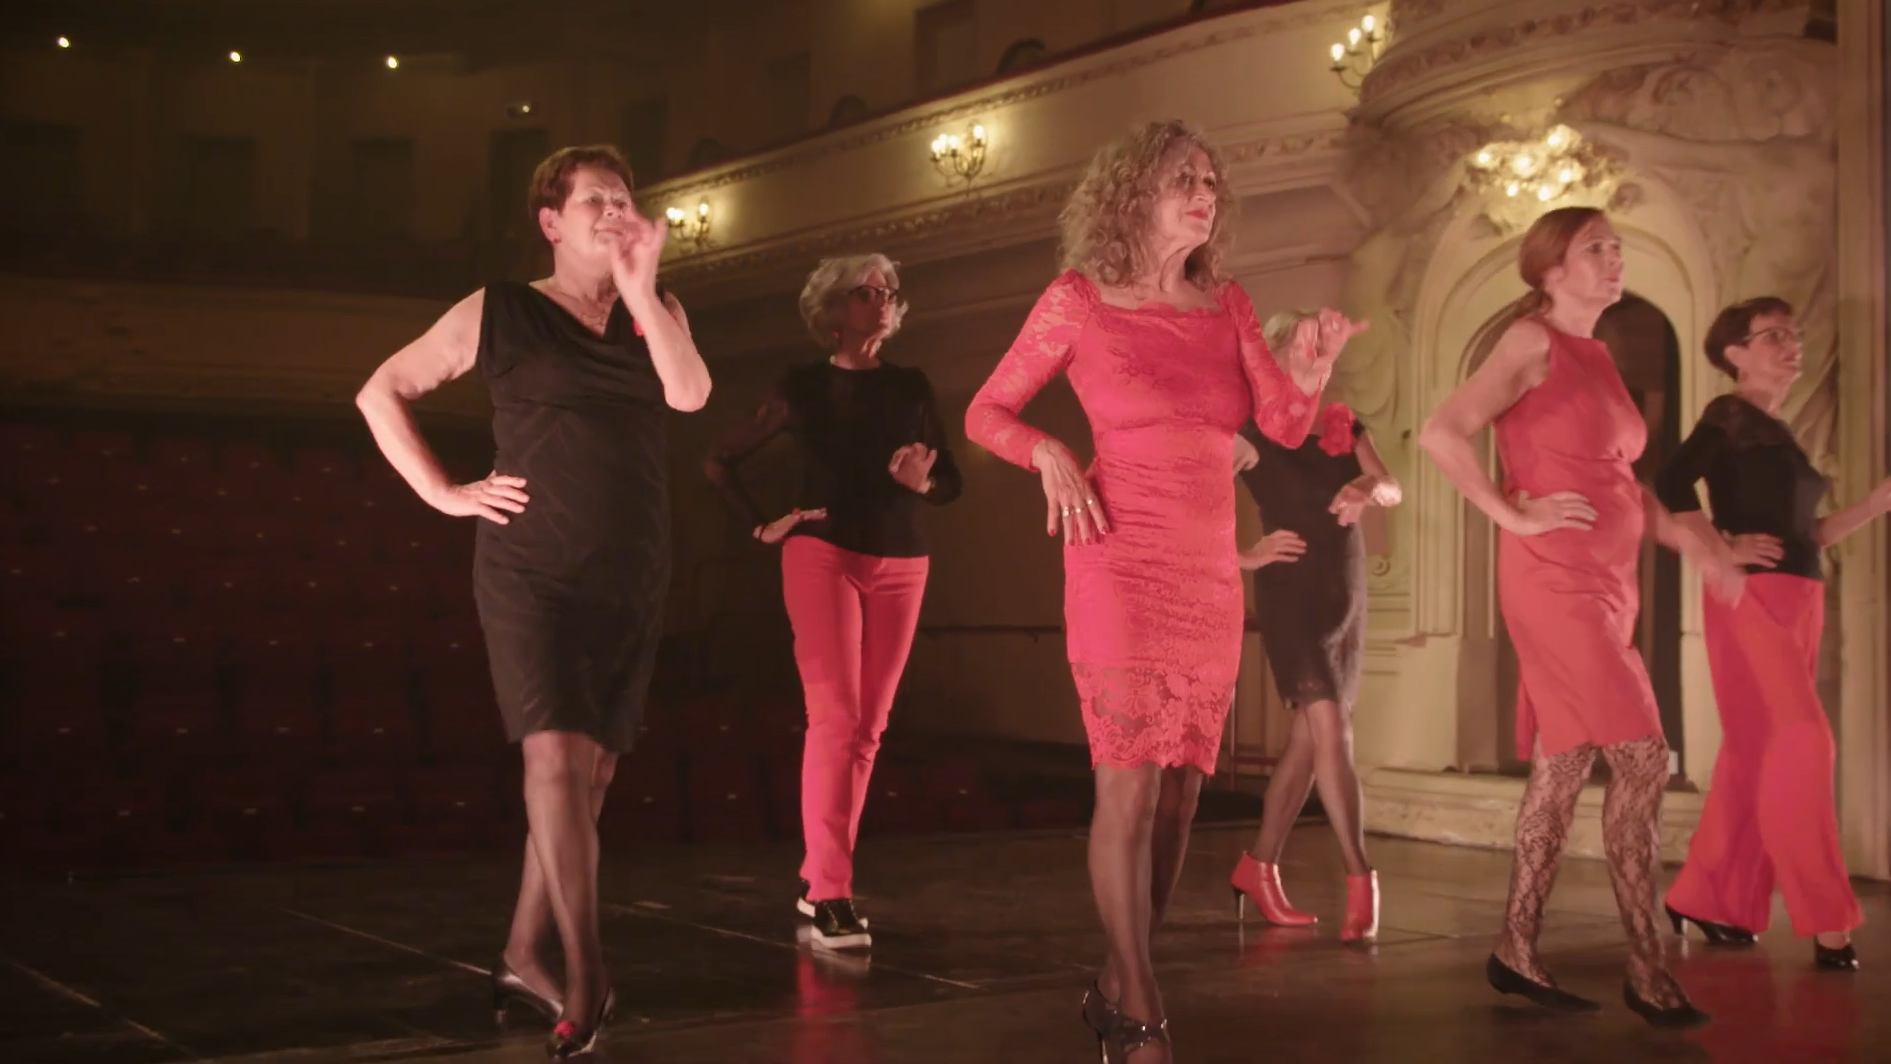 Six women dancing on a warmly lit stage. They wear feminine red and black clothing and are moving delicately